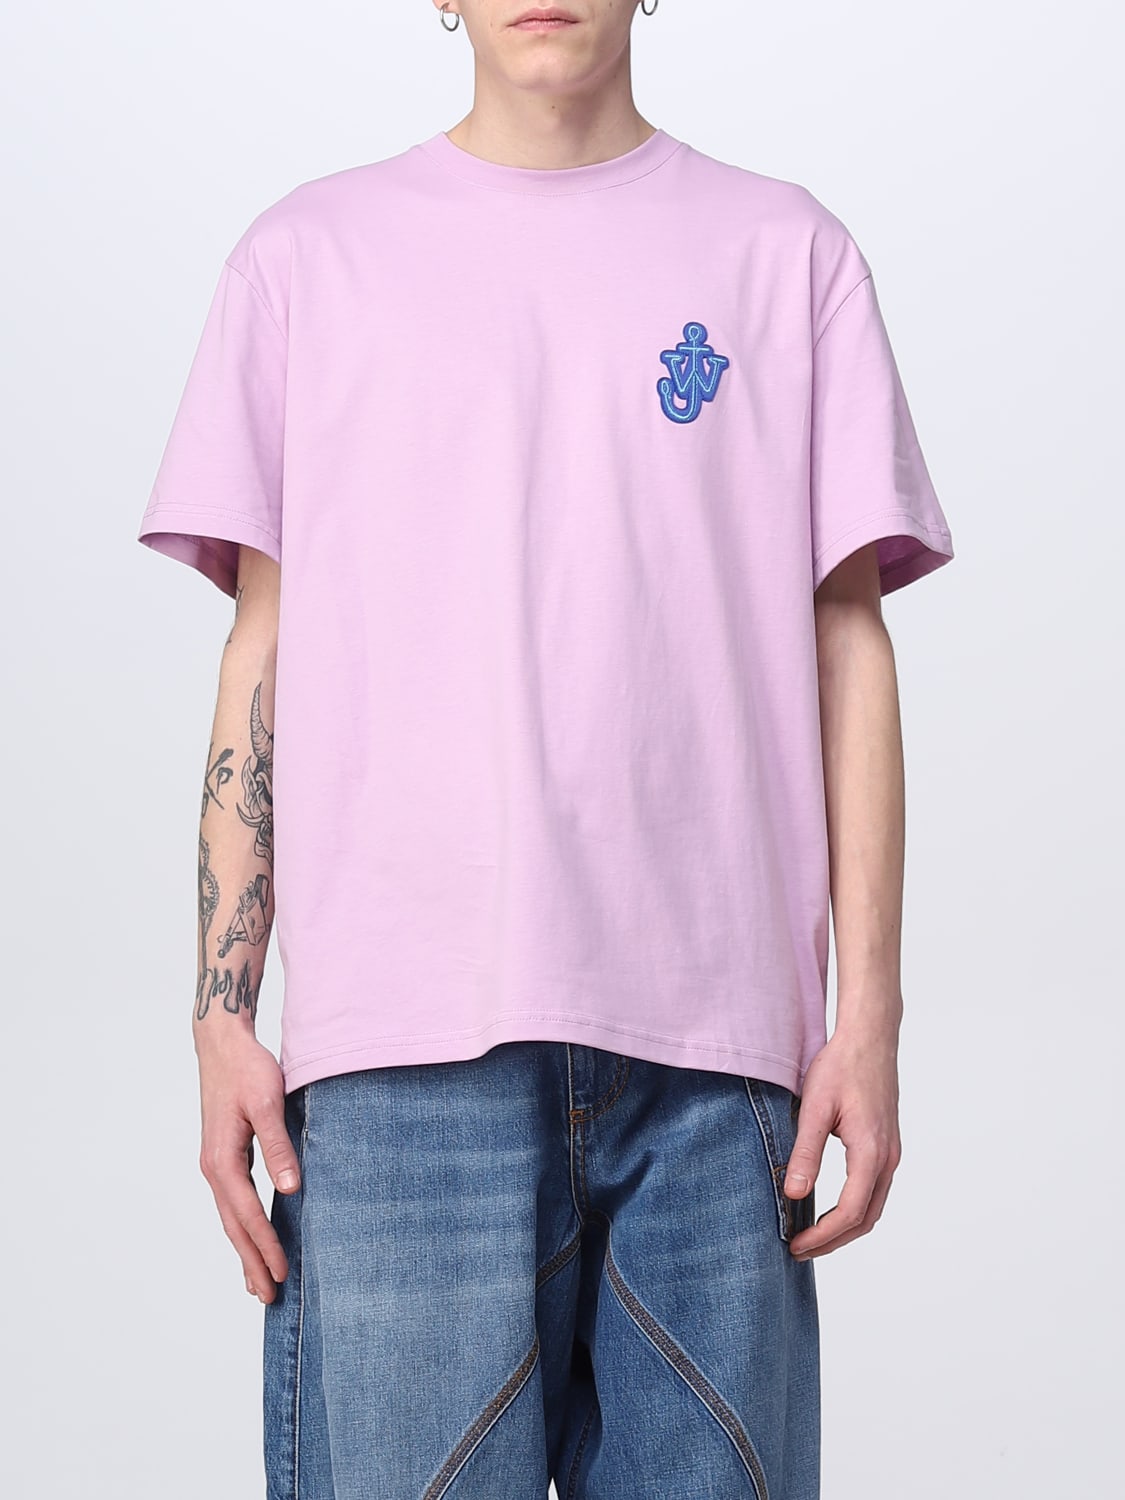 Jw Anderson Outlet: t-shirt for man - Pink | Jw Anderson t-shirt